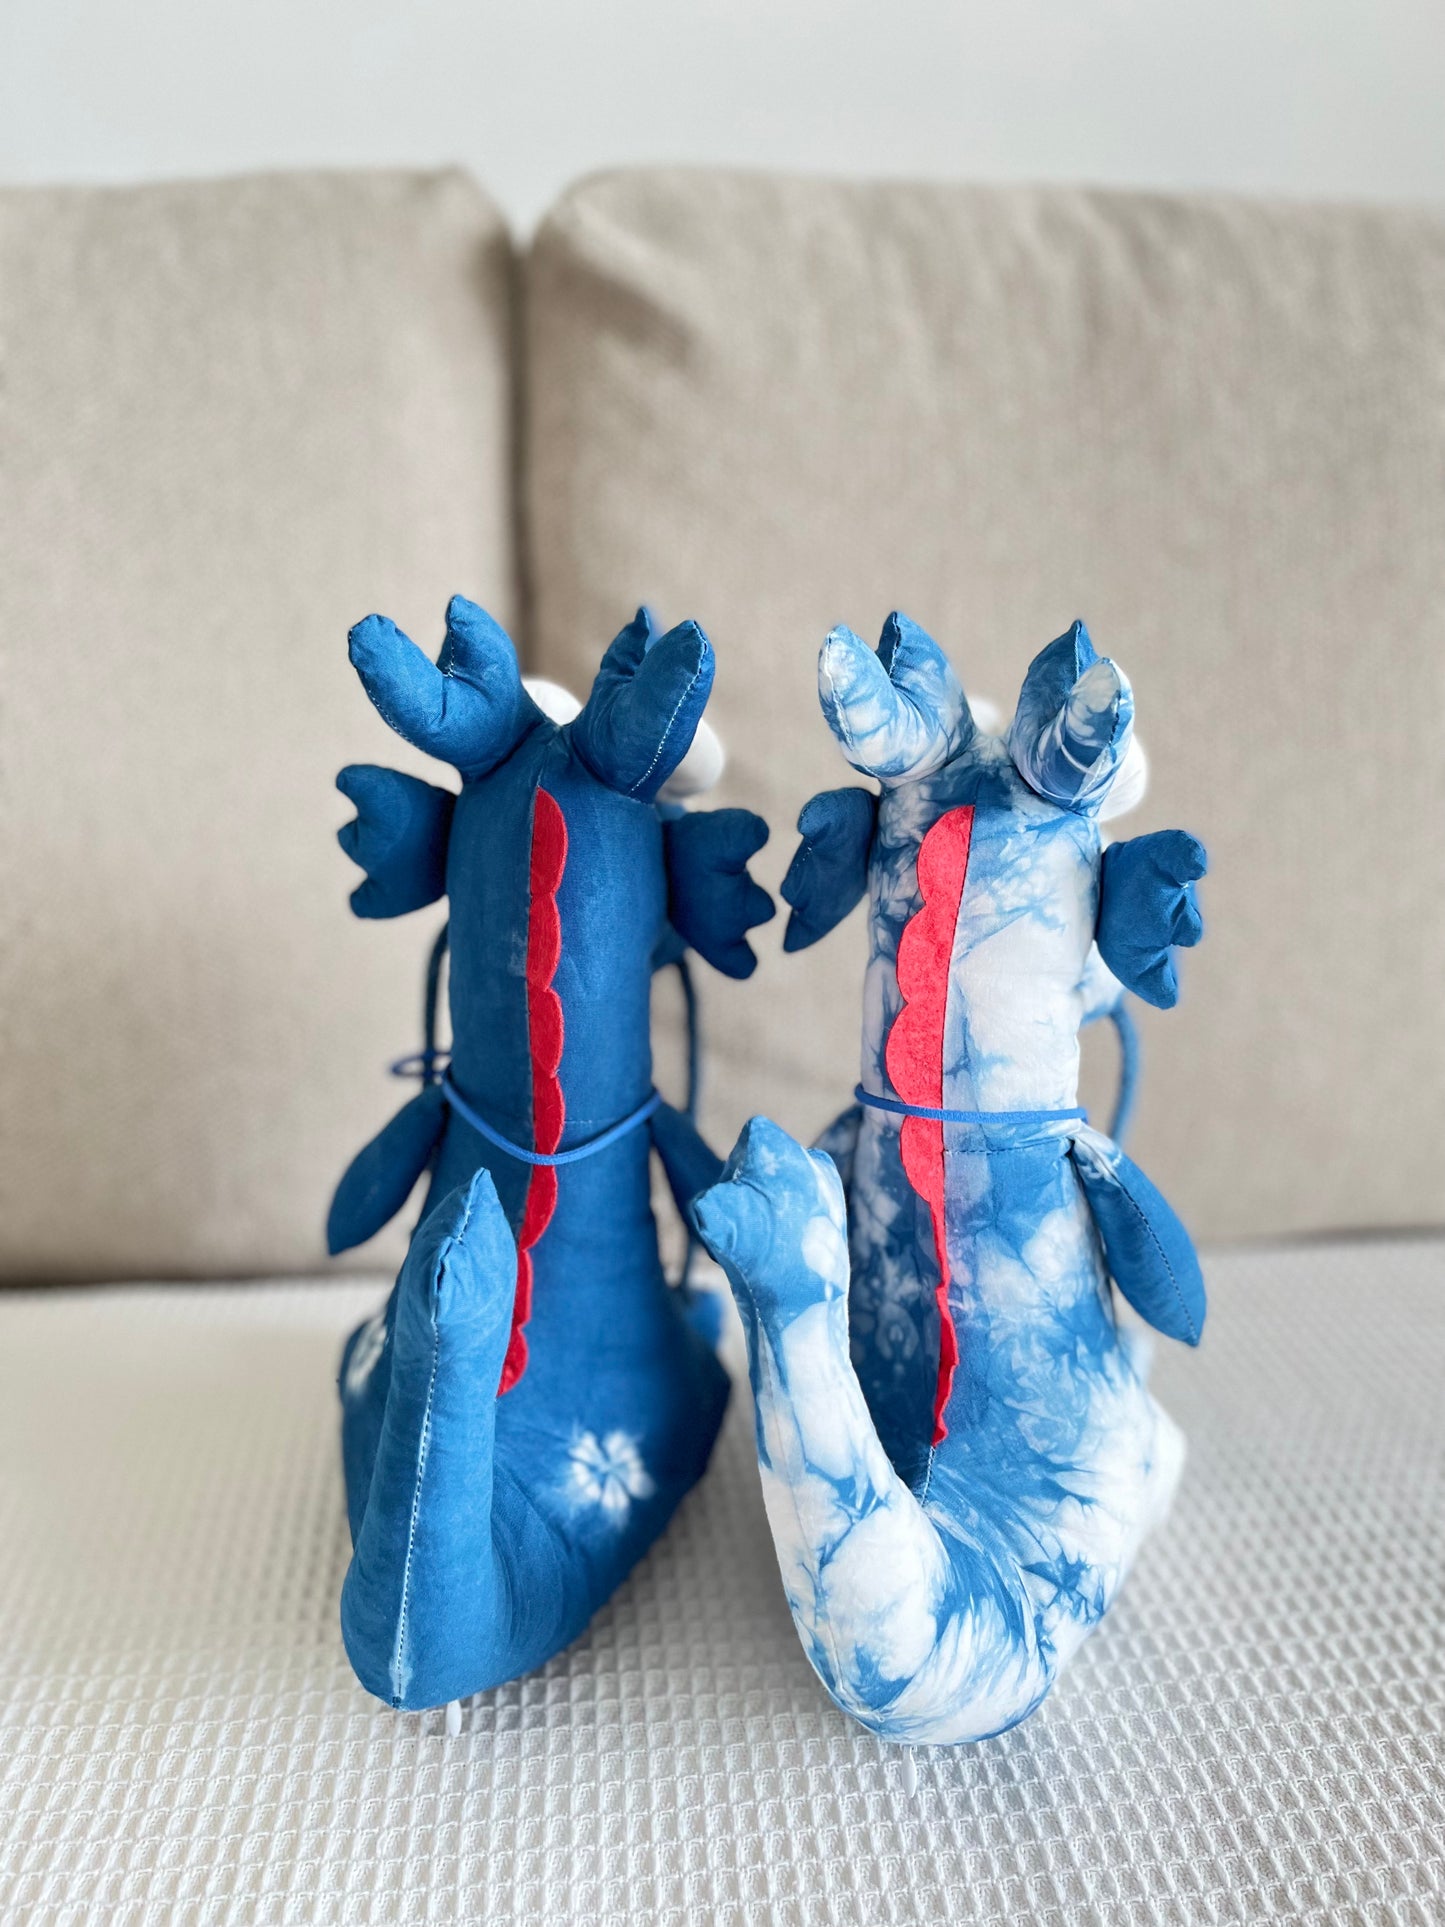 Natural cotton baby dragon doll made with indigo botanical dyed fabric. Lovely stuffed soft dragon toy. A new born / easter basket gift.